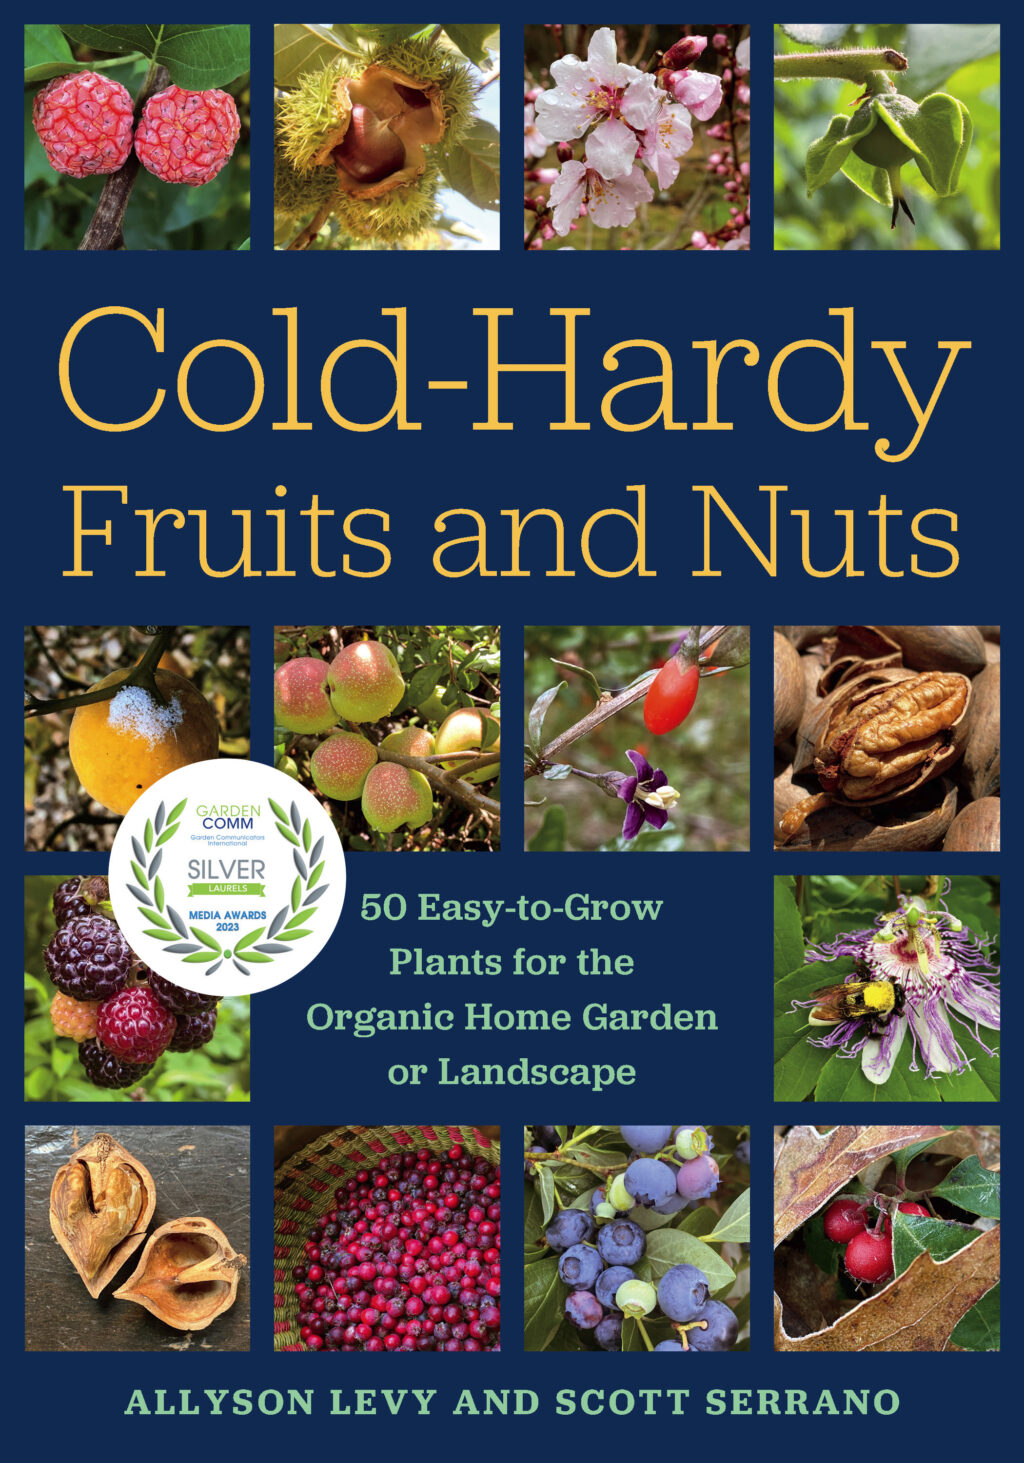 Cold-Hardy Fruits and Nuts 50 Easy-to-Grow Plants for the Organic Home Garden or Landscape